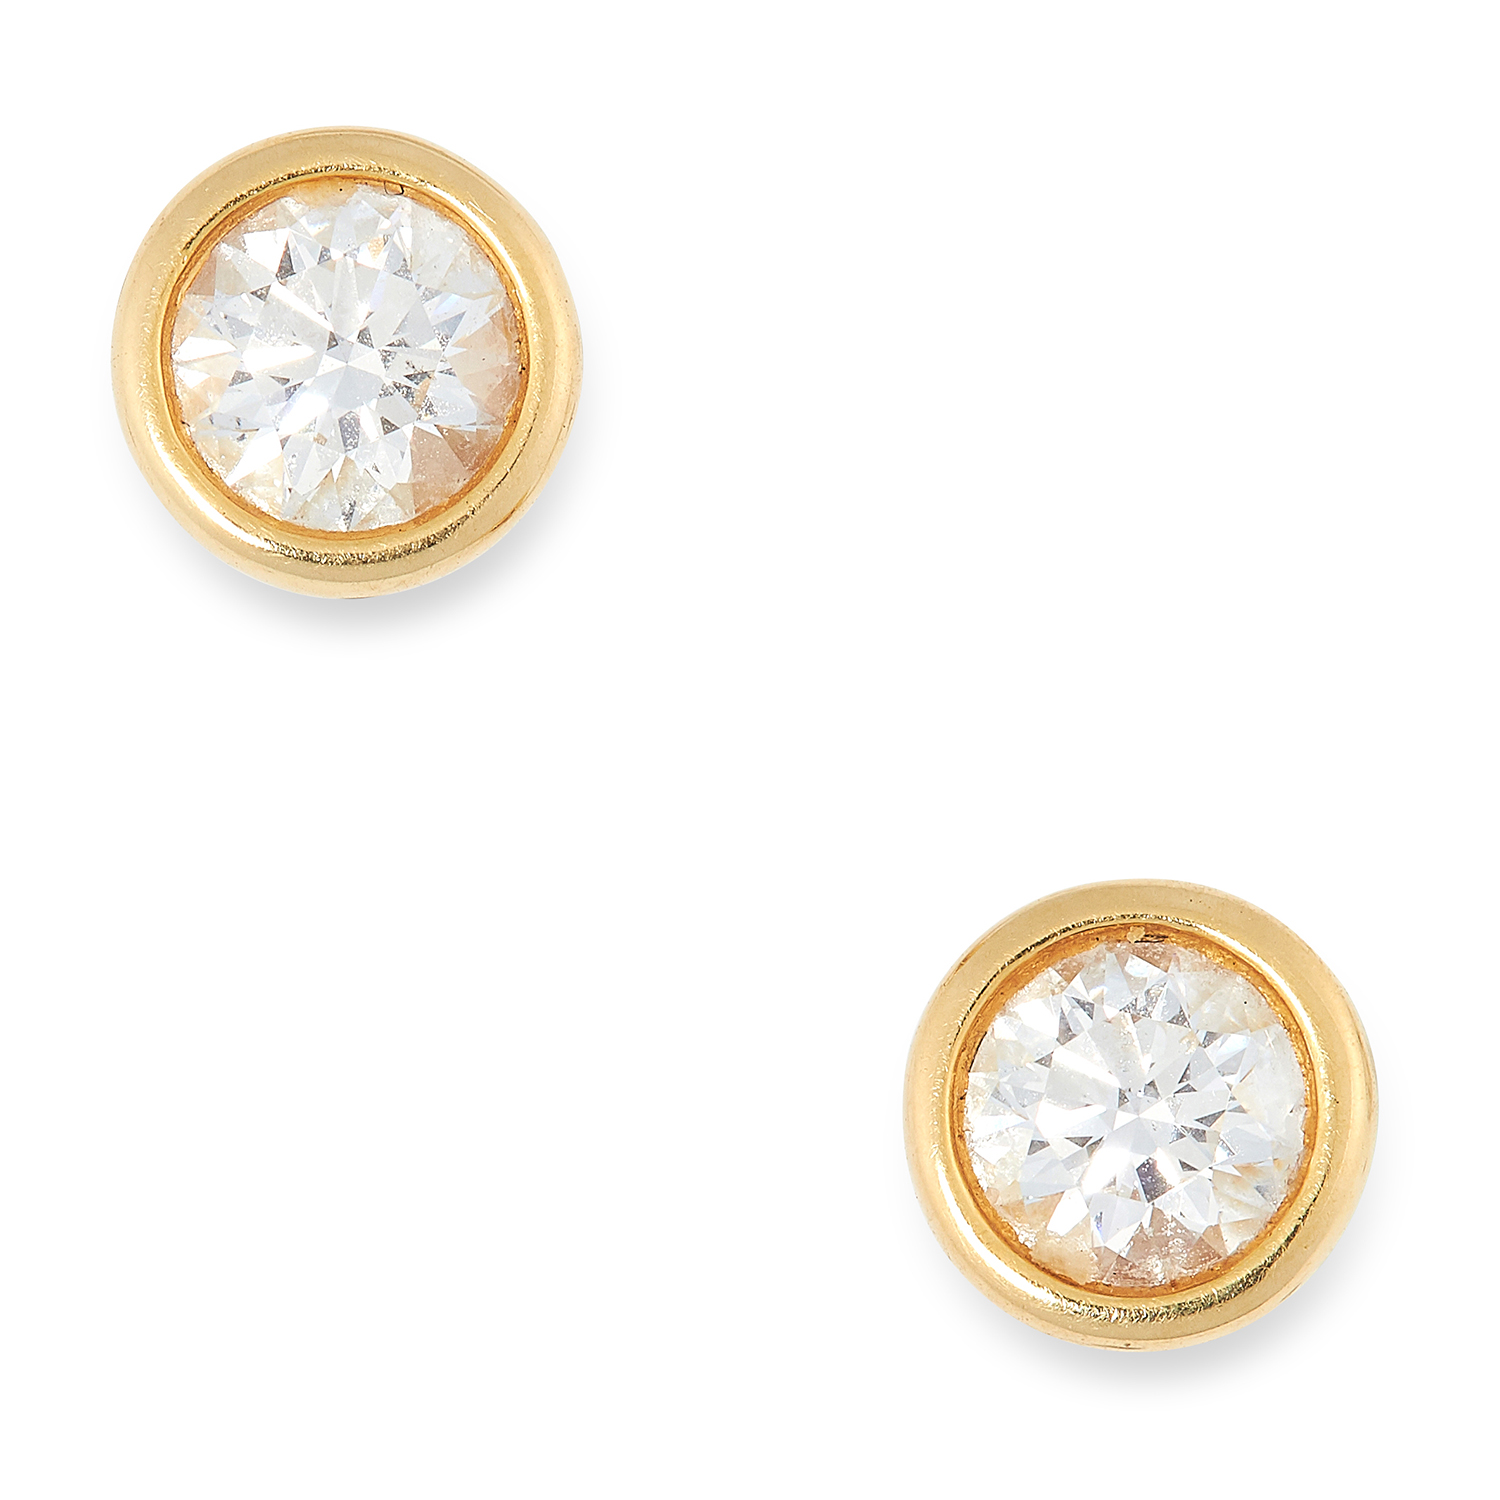 A PAIR OF 1.10 CARAT DIAMONDS BY THE YARD STUD EARRINGS, ELSA PERETTI FOR TIFFANY & CO in 18ct